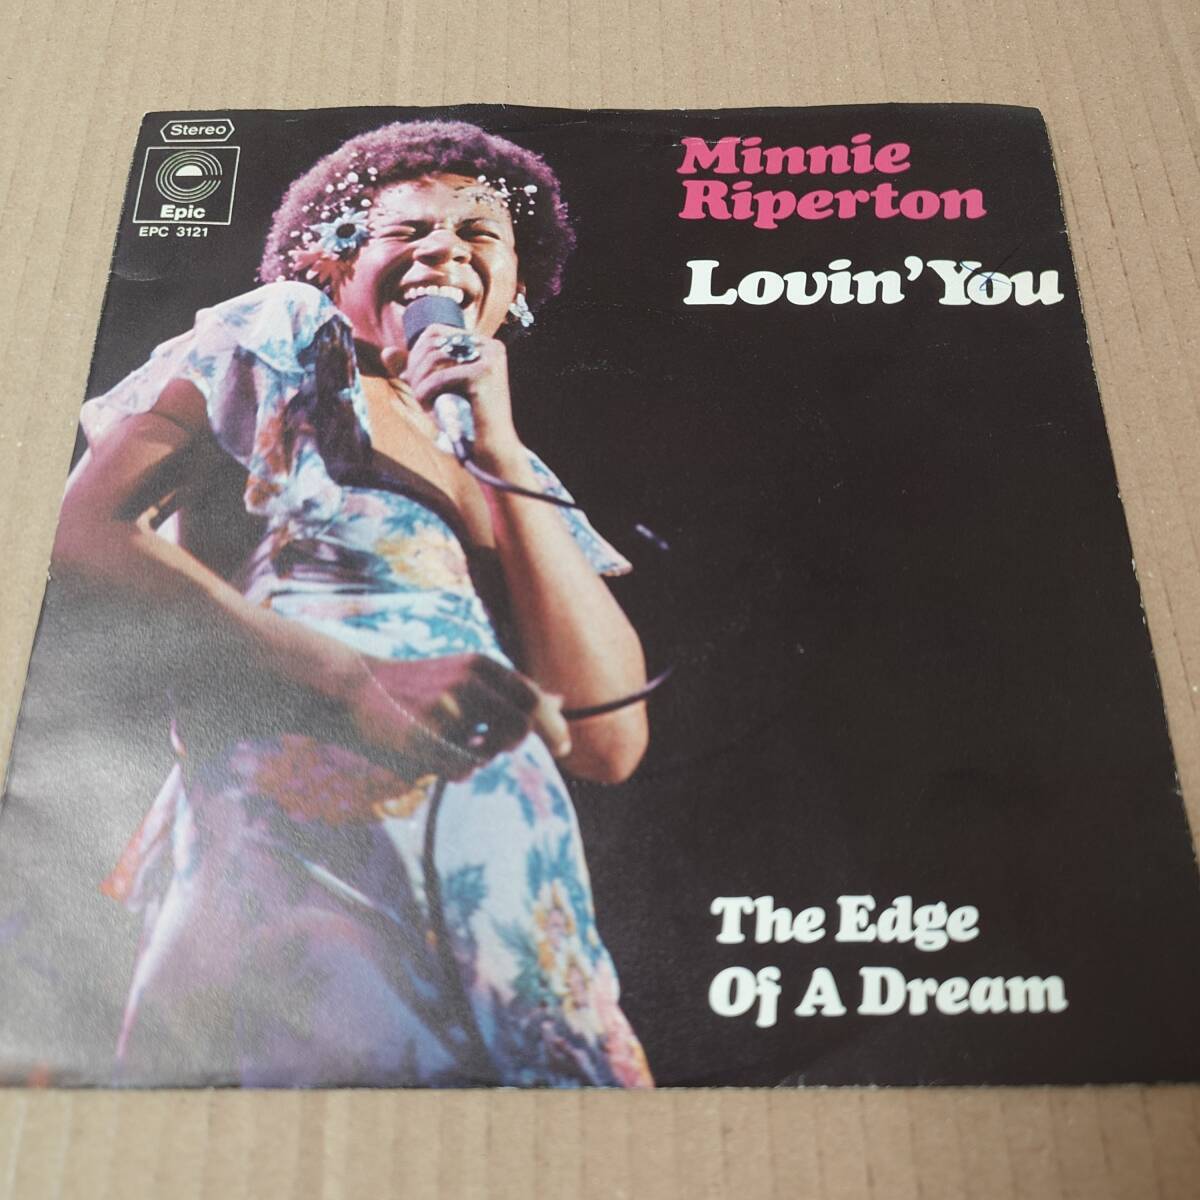 Minnie Riperton - Lovin' You / The Edge Of A Dream // Epic 7inch / Lovers / Janet Kay Loving you / AA0654の画像1